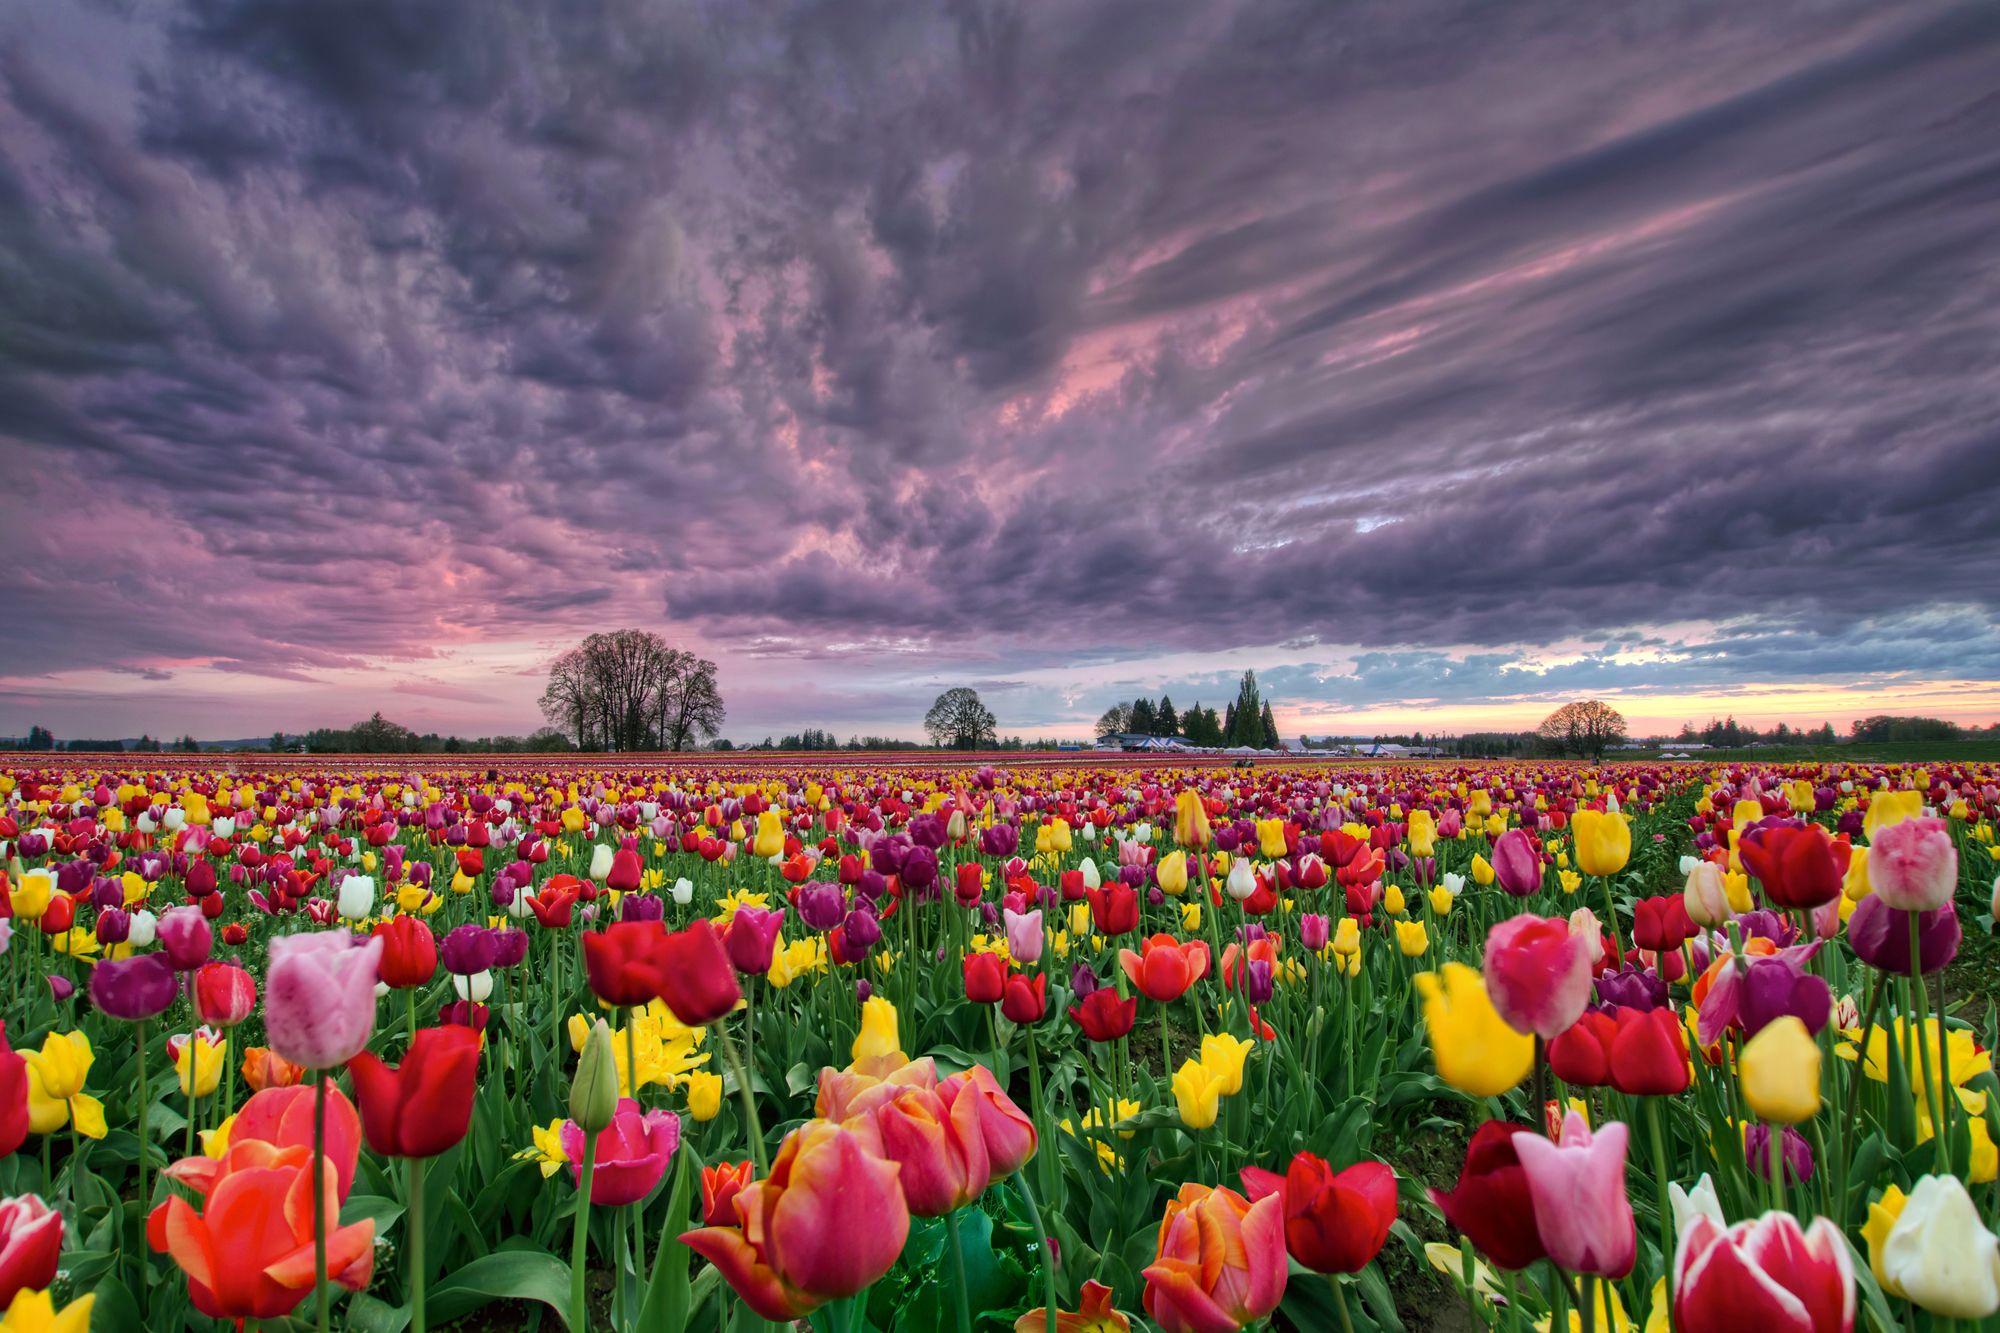 Image result for tulips